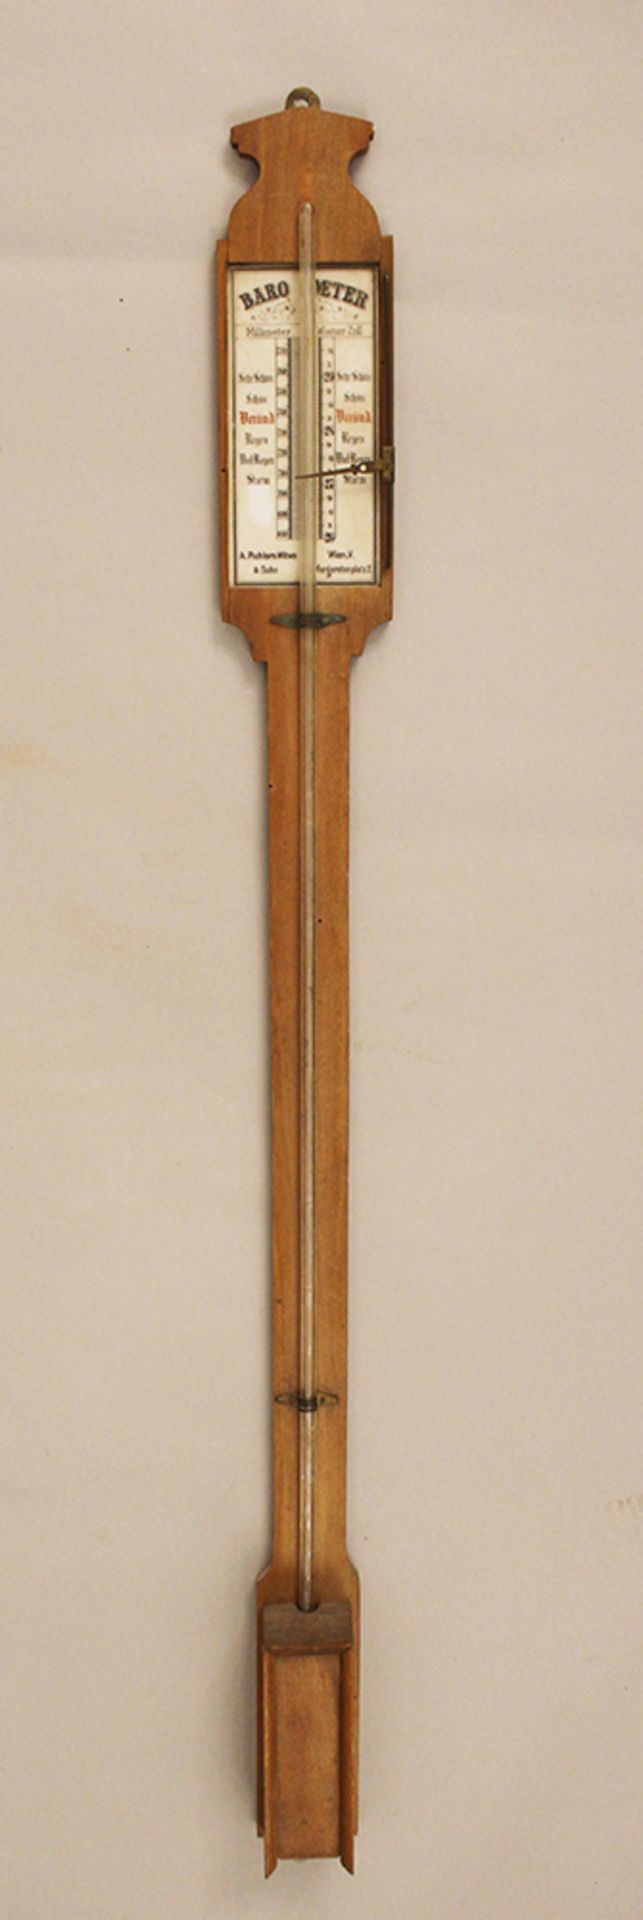 Barometer with glass scale , wooden panel , Vienna around 1900. 95 cm height - Image 2 of 3